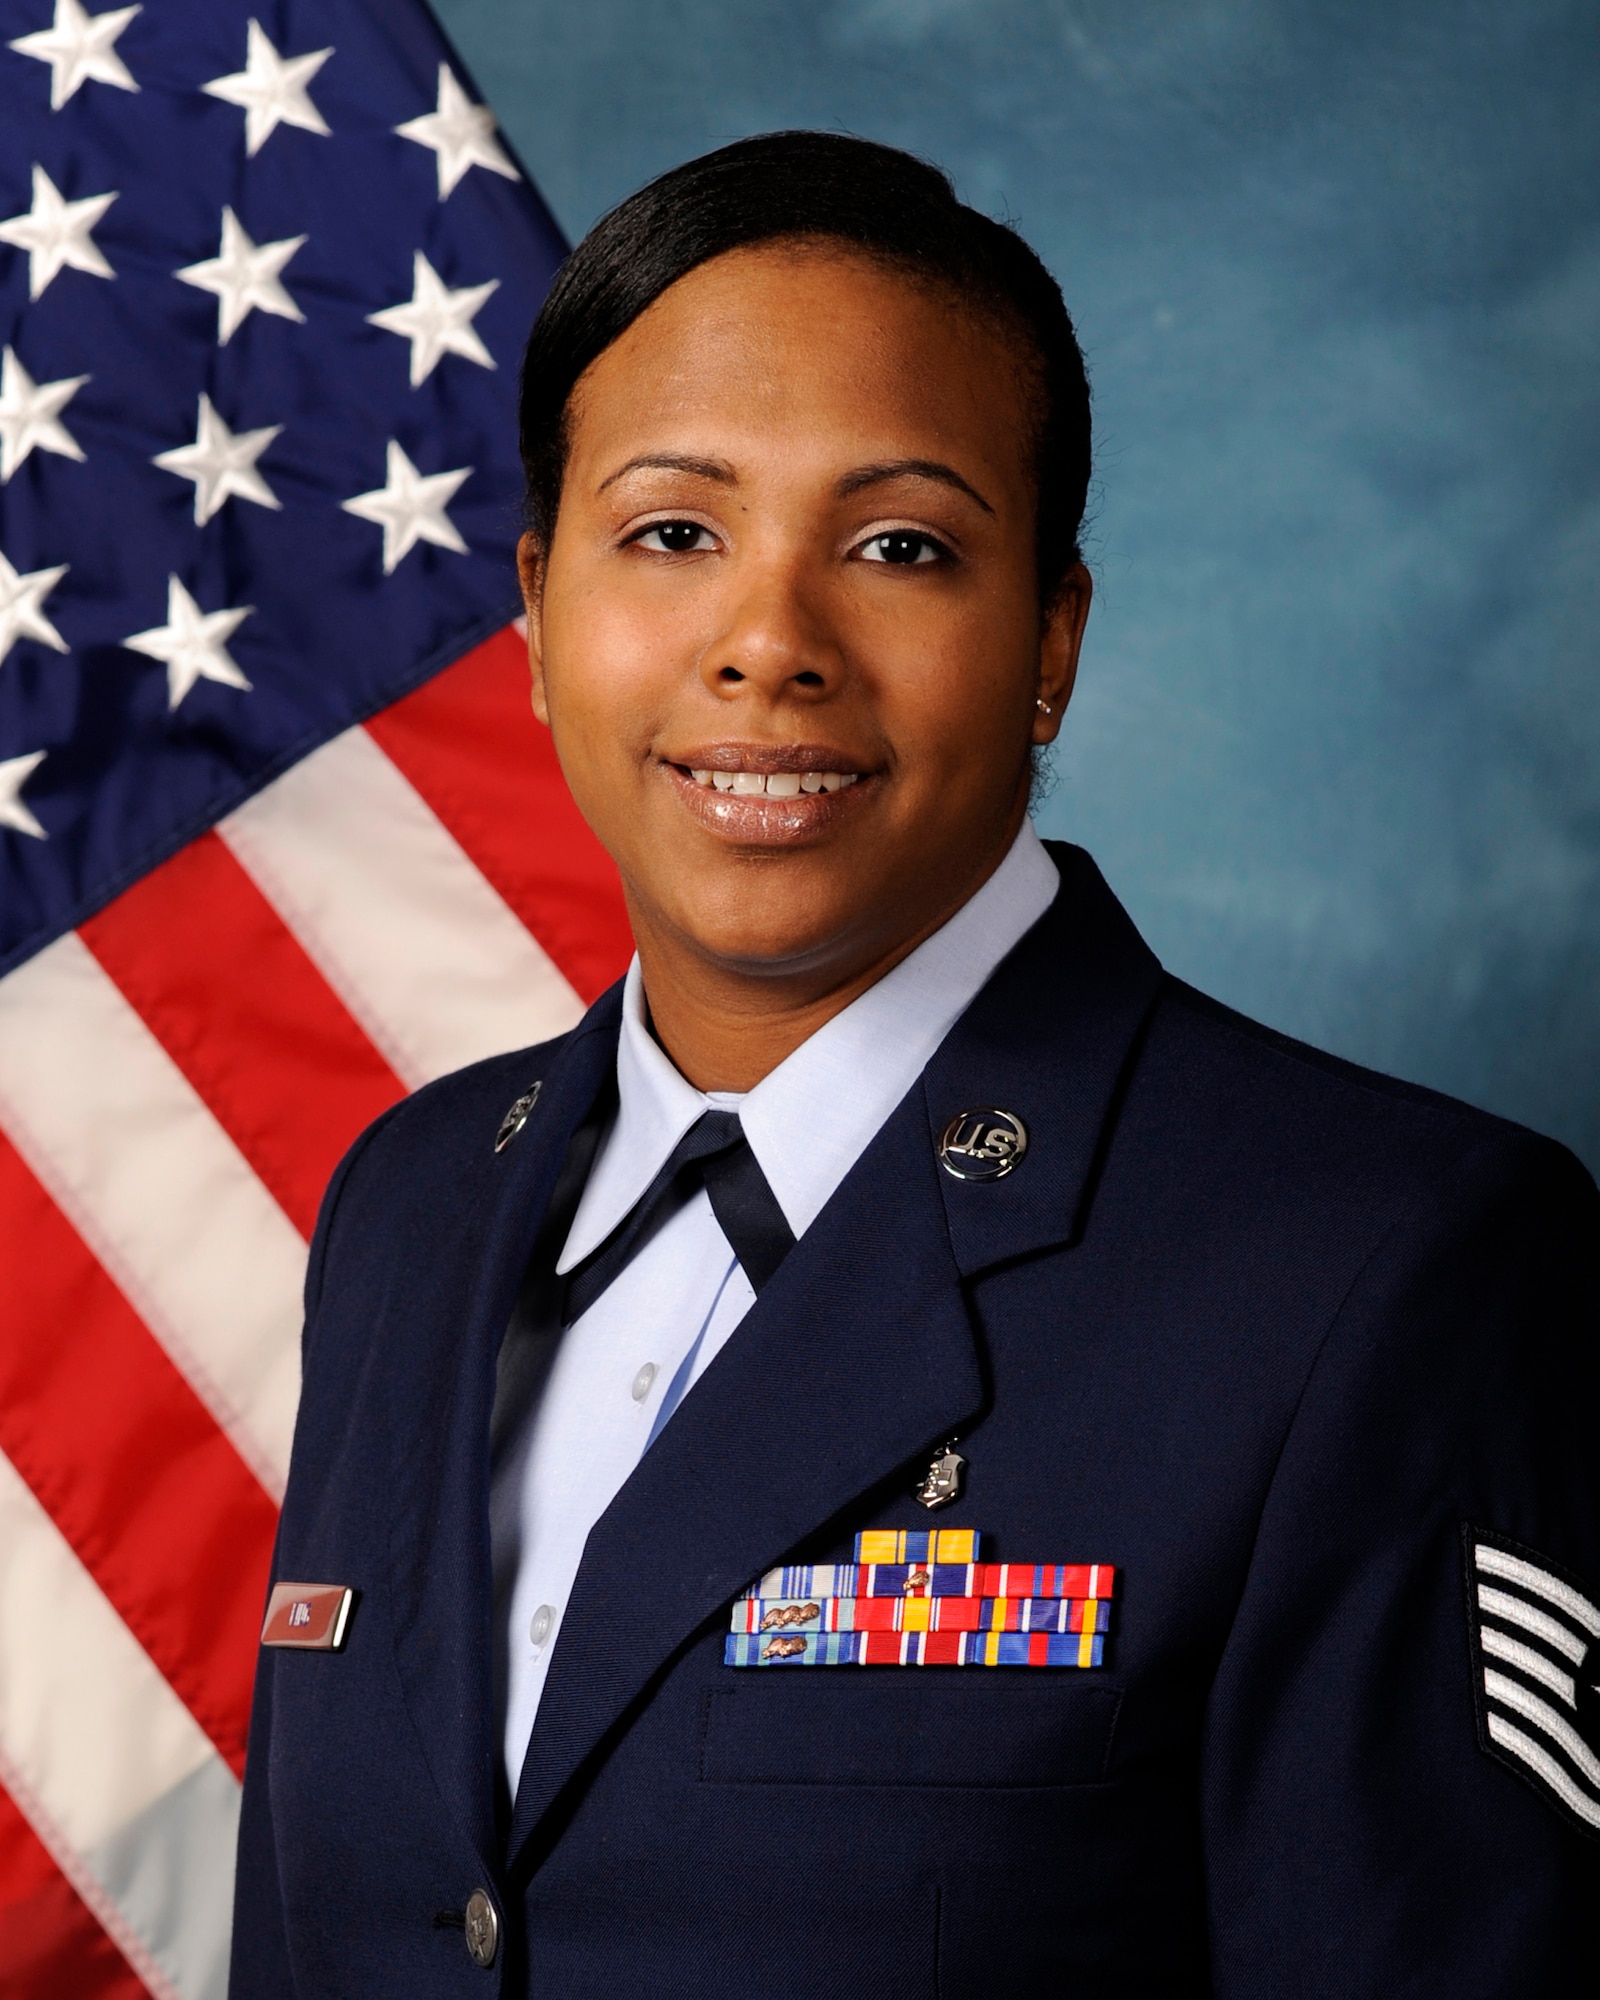 OFFUTT AIR FORCE BASE, Neb. -- Tech. Sgt. Tia M. King, from Langley AFB, Va., is one of 29 Airmen nominated for awards who will attend the 2010 Air Combat Command Outstanding Airmen of the Year Awards Banquet in Omaha, Neb., April 21.Sergeant King is nominated for the NCO of the Year Award. U.S. Air Force courtesy photo.